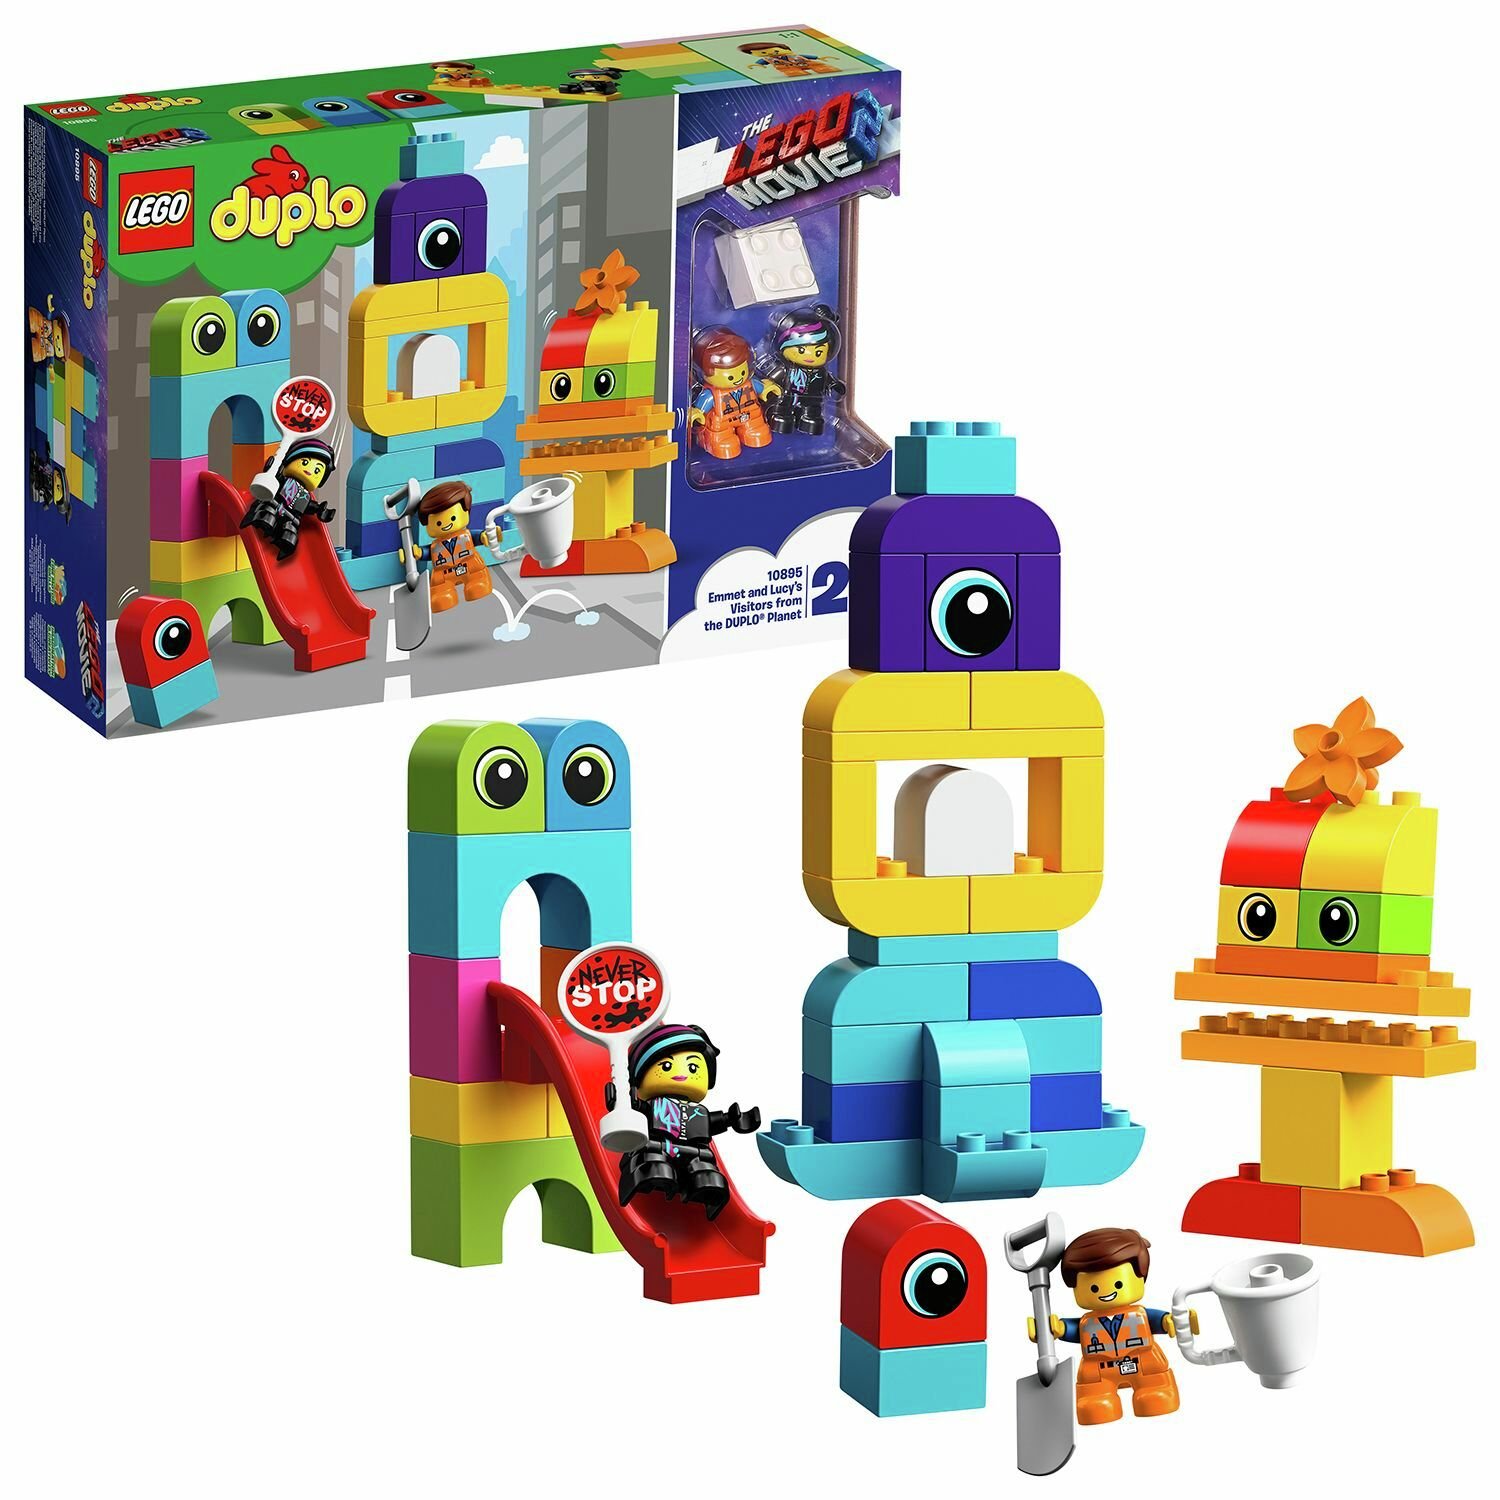 LEGO DUPLO LEGO Movie 2 Emmet and Lucy Playset - 10895